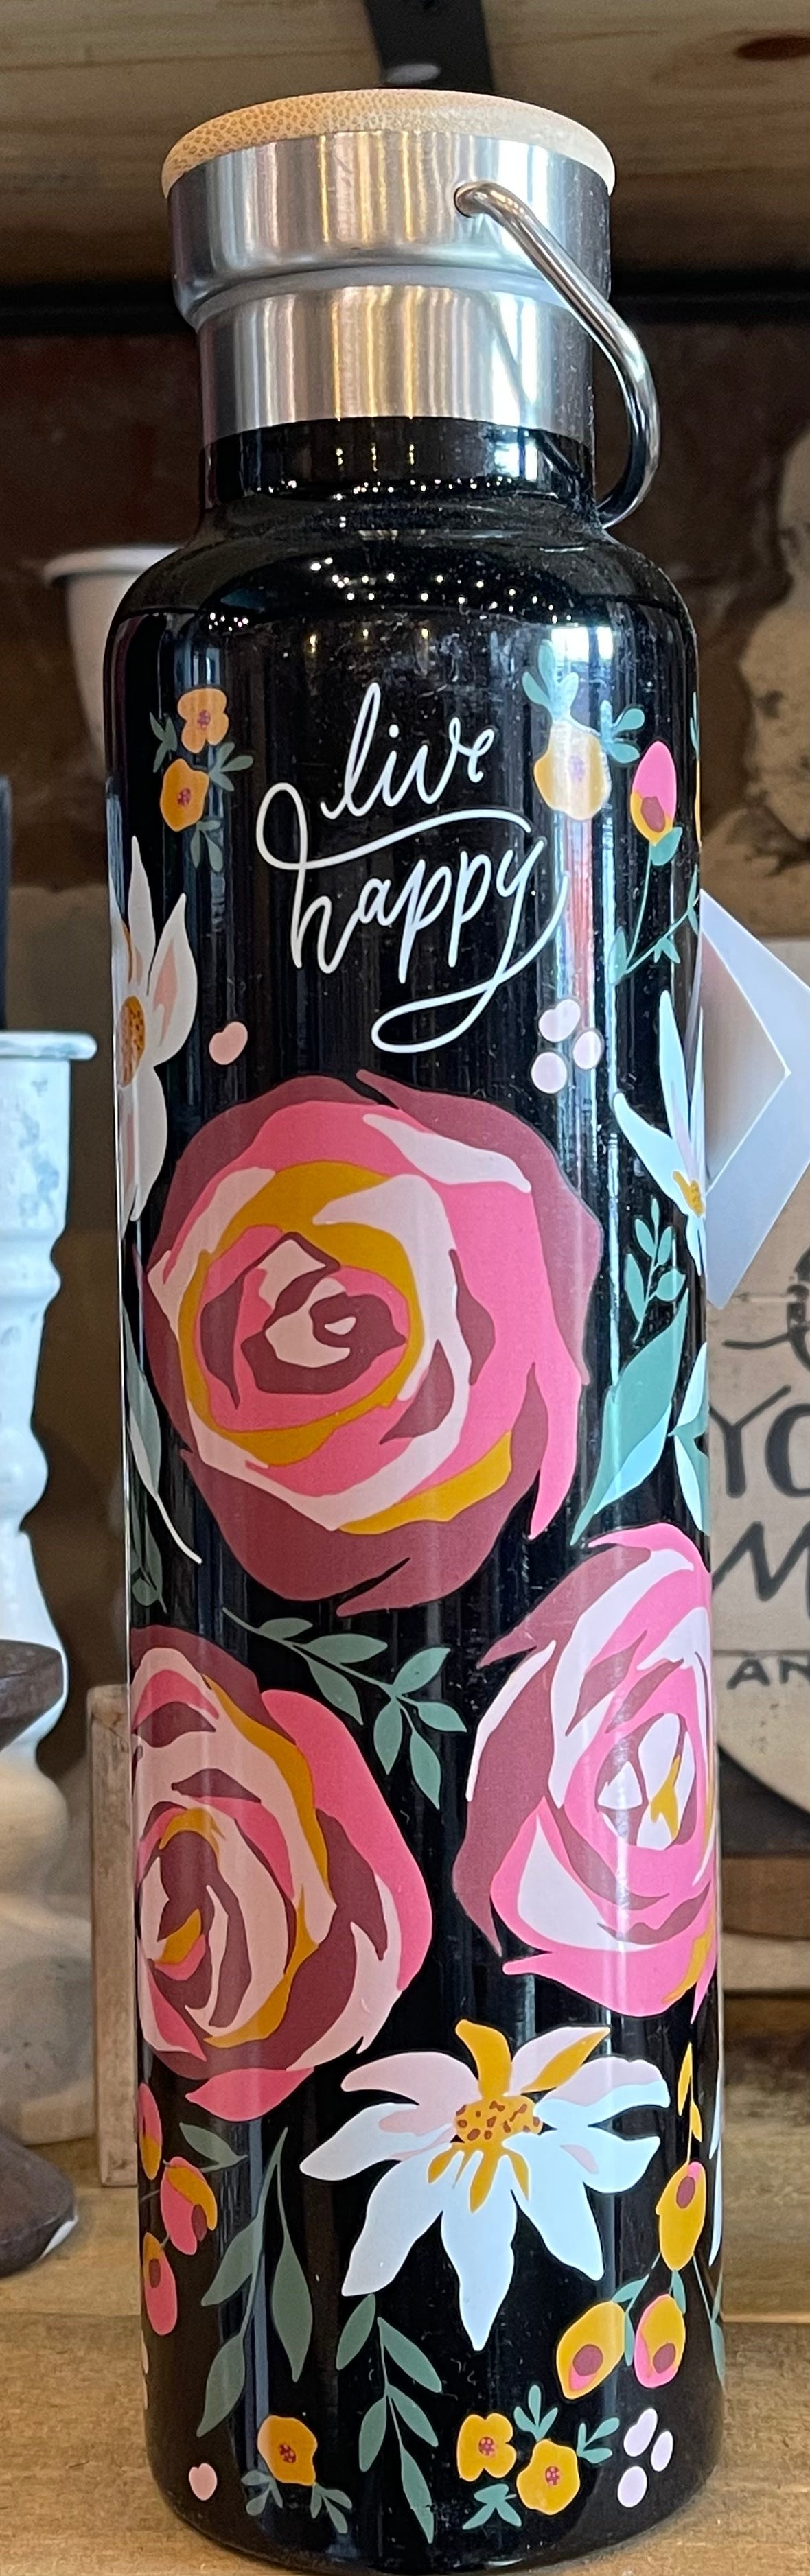 Insulated Bottle - Live Happy